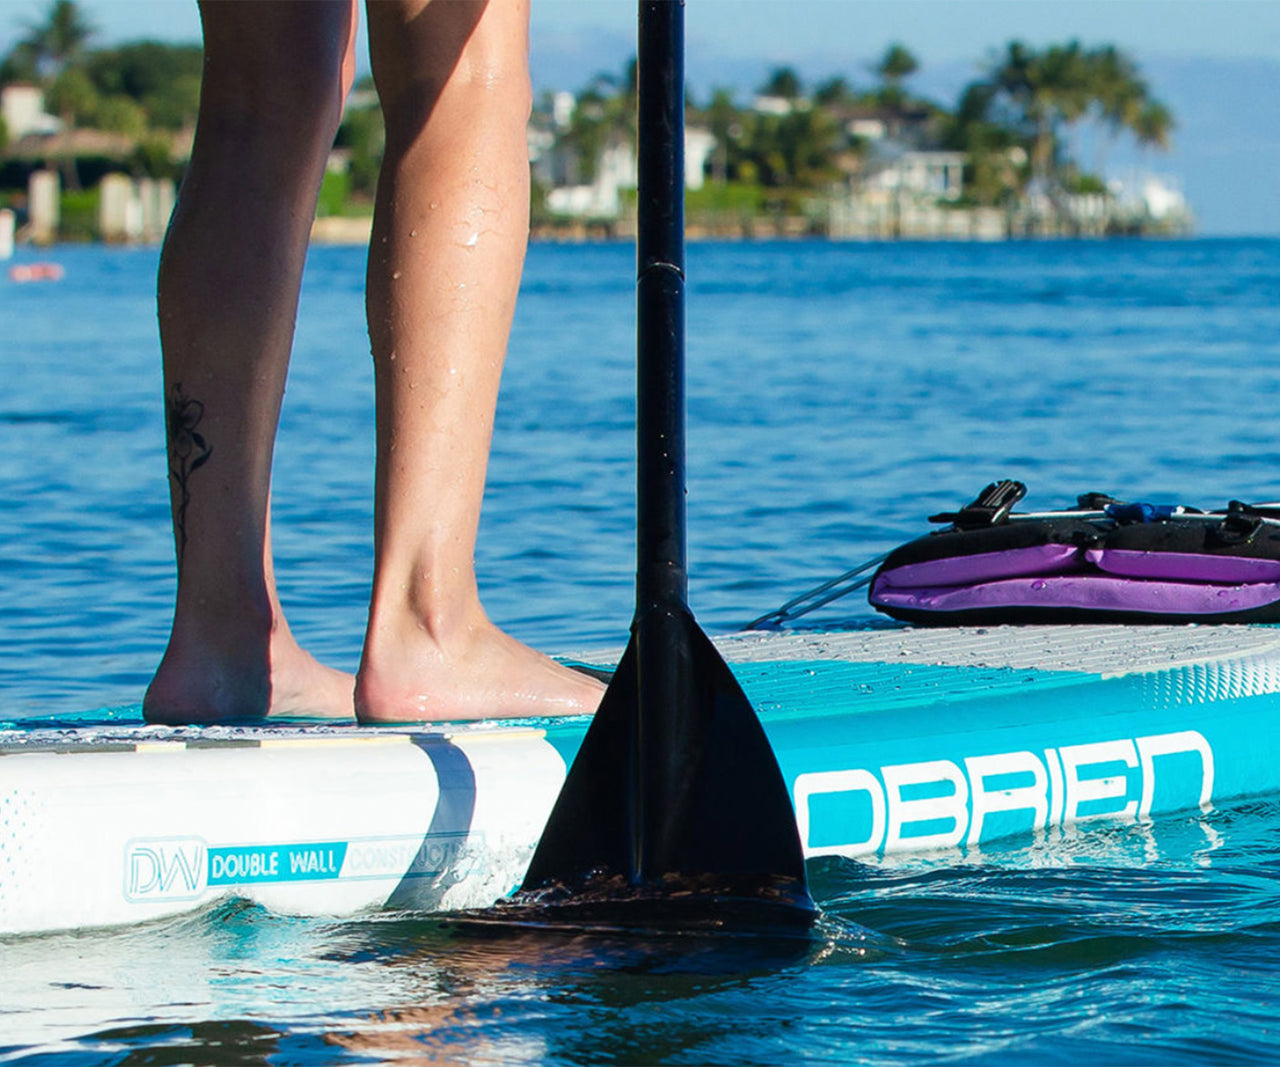 Stand Up Paddleboards